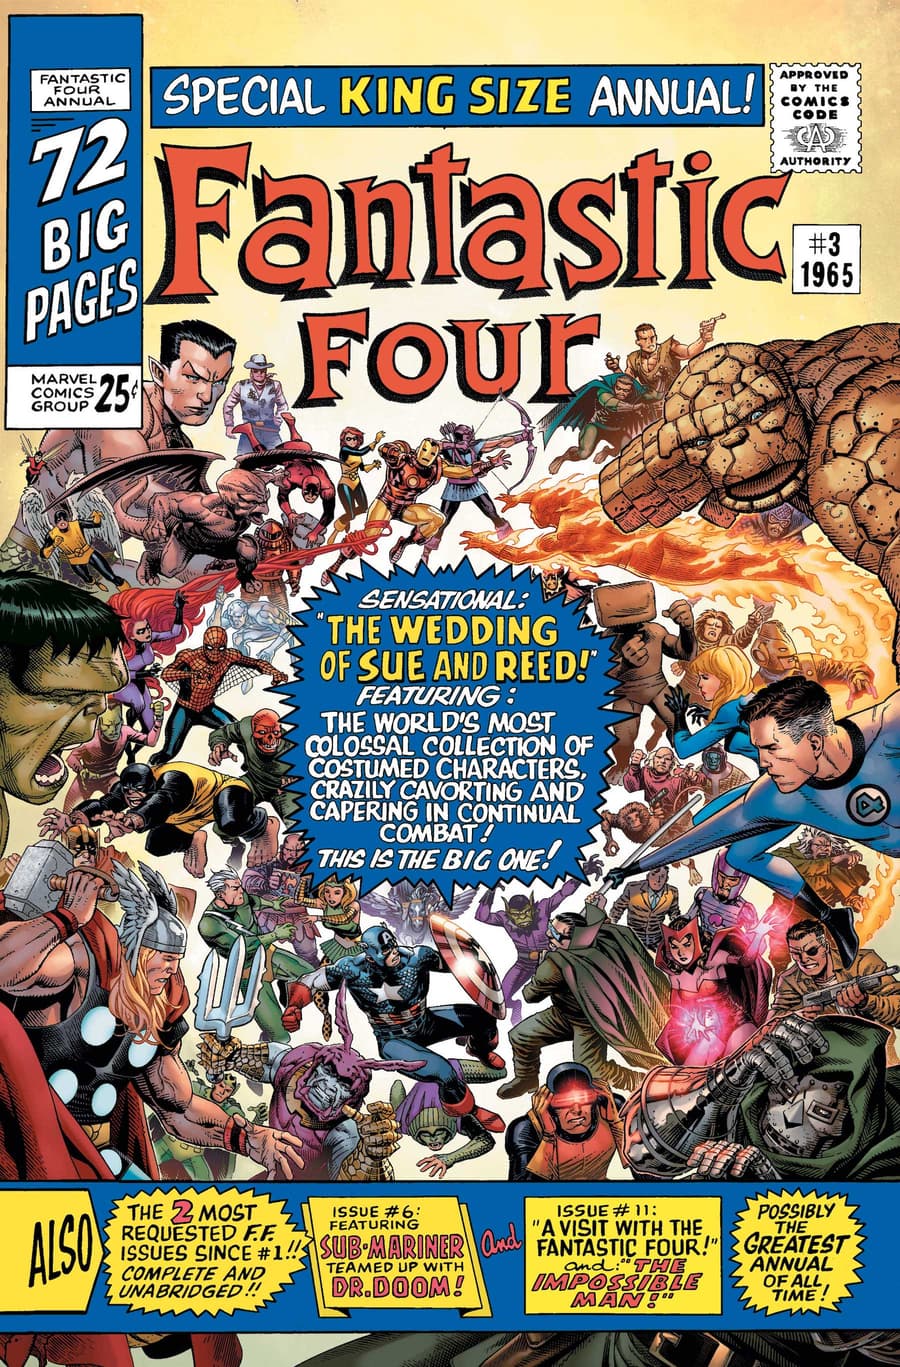 FANTASTIC FOUR ANNIVERSARY TRIBUTE #1 variant cover by Jim Cheung